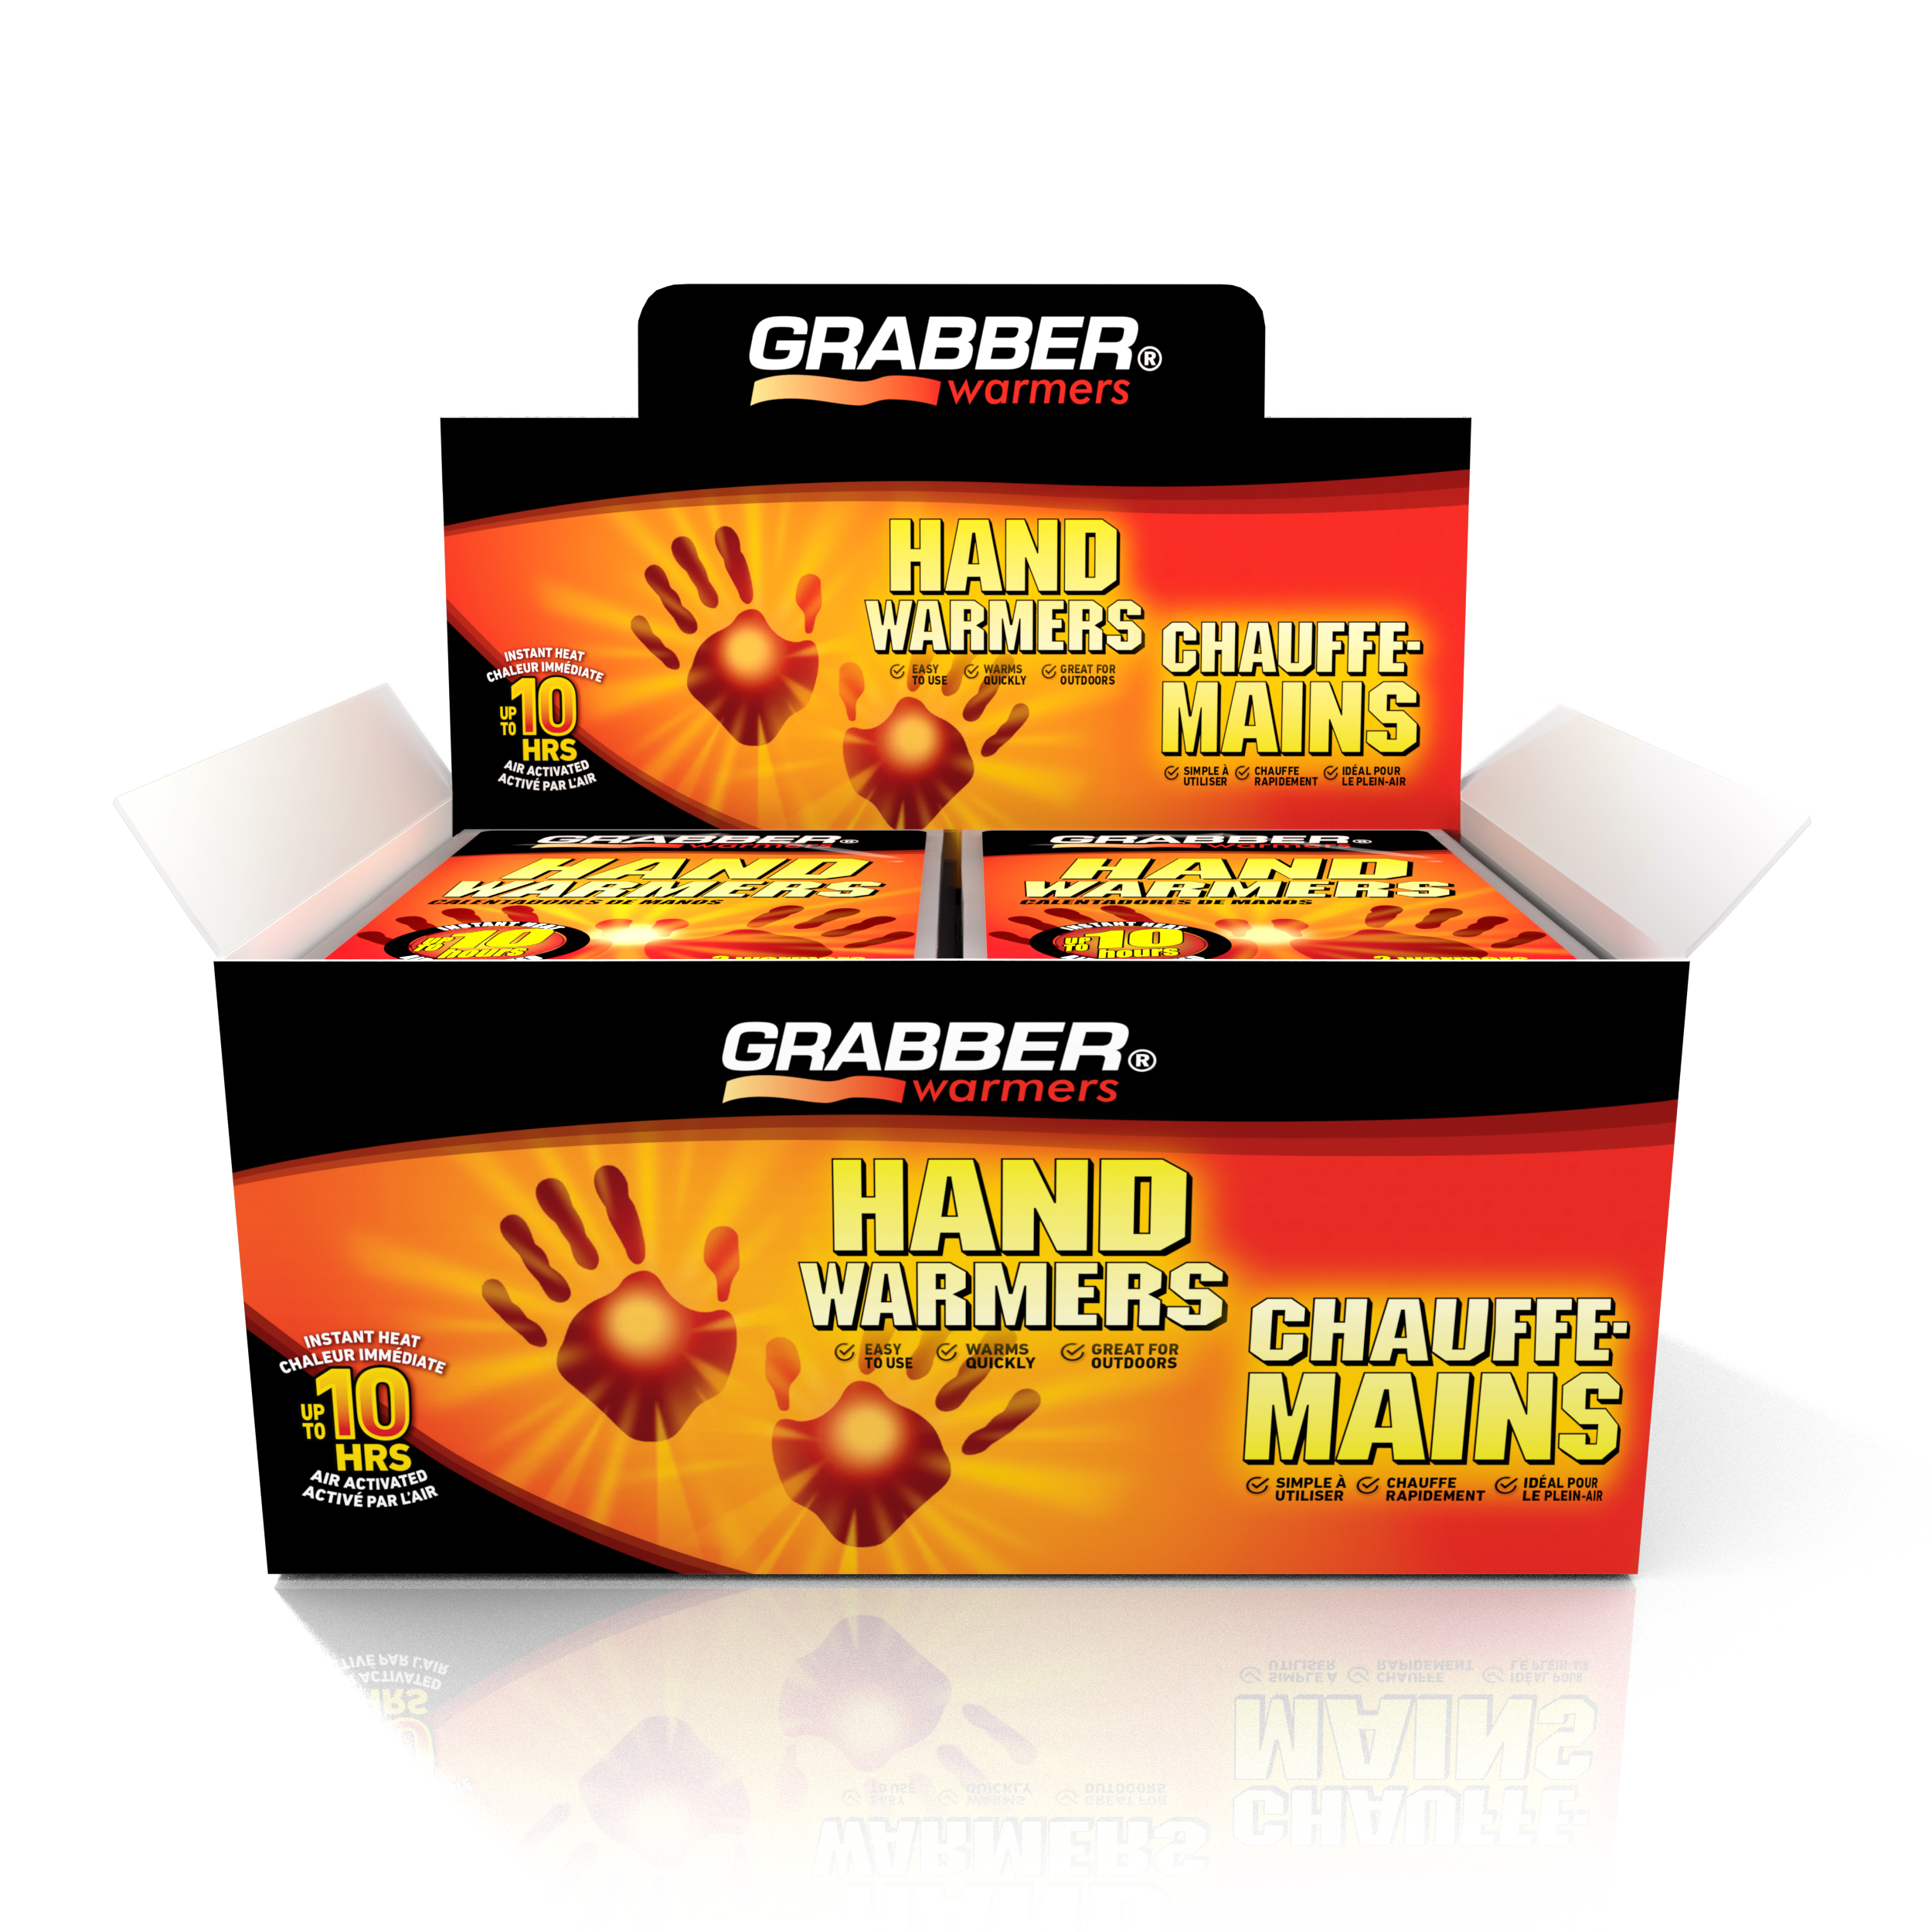 Image Grabber hand warmers, pair